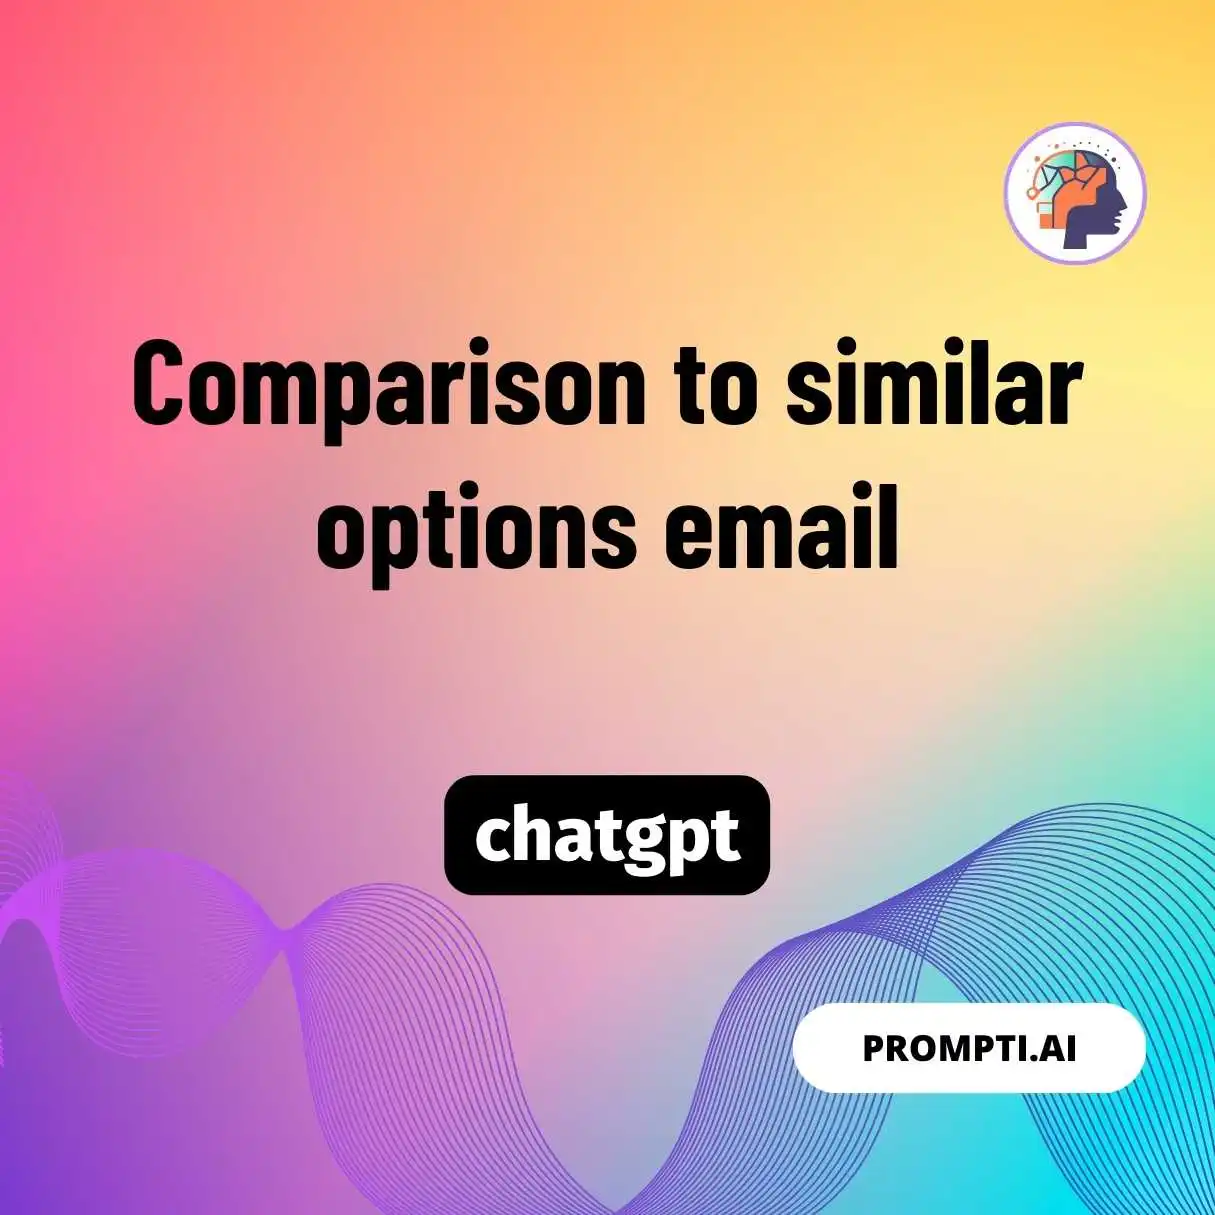 Comparison to similar options email